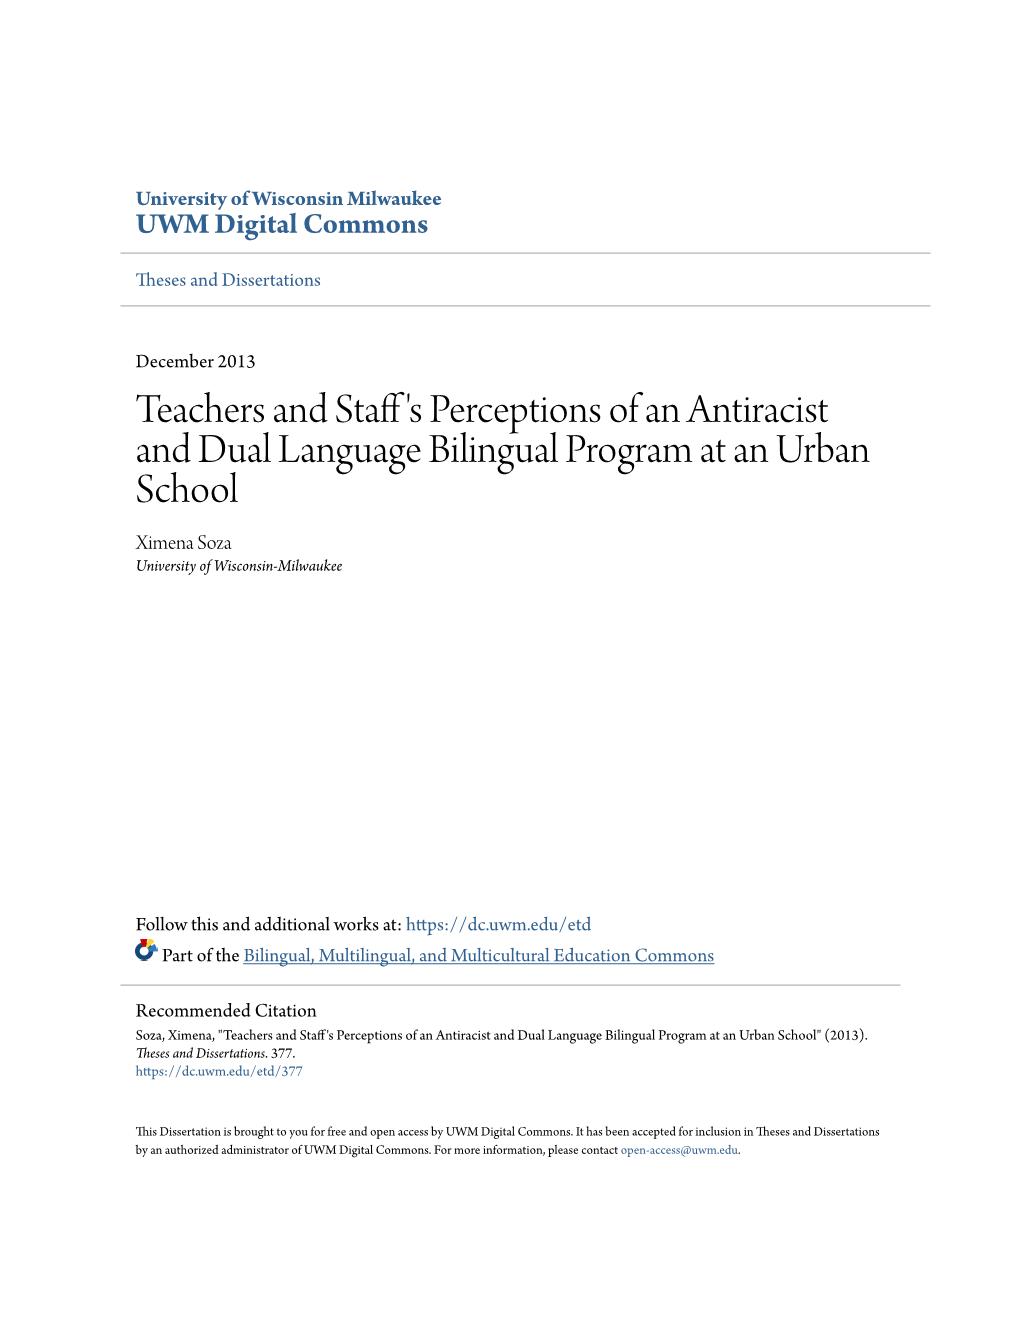 Teachers and Staff's Perceptions of an Antiracist and Dual Language Bilingual Program at an Urban School" (2013)